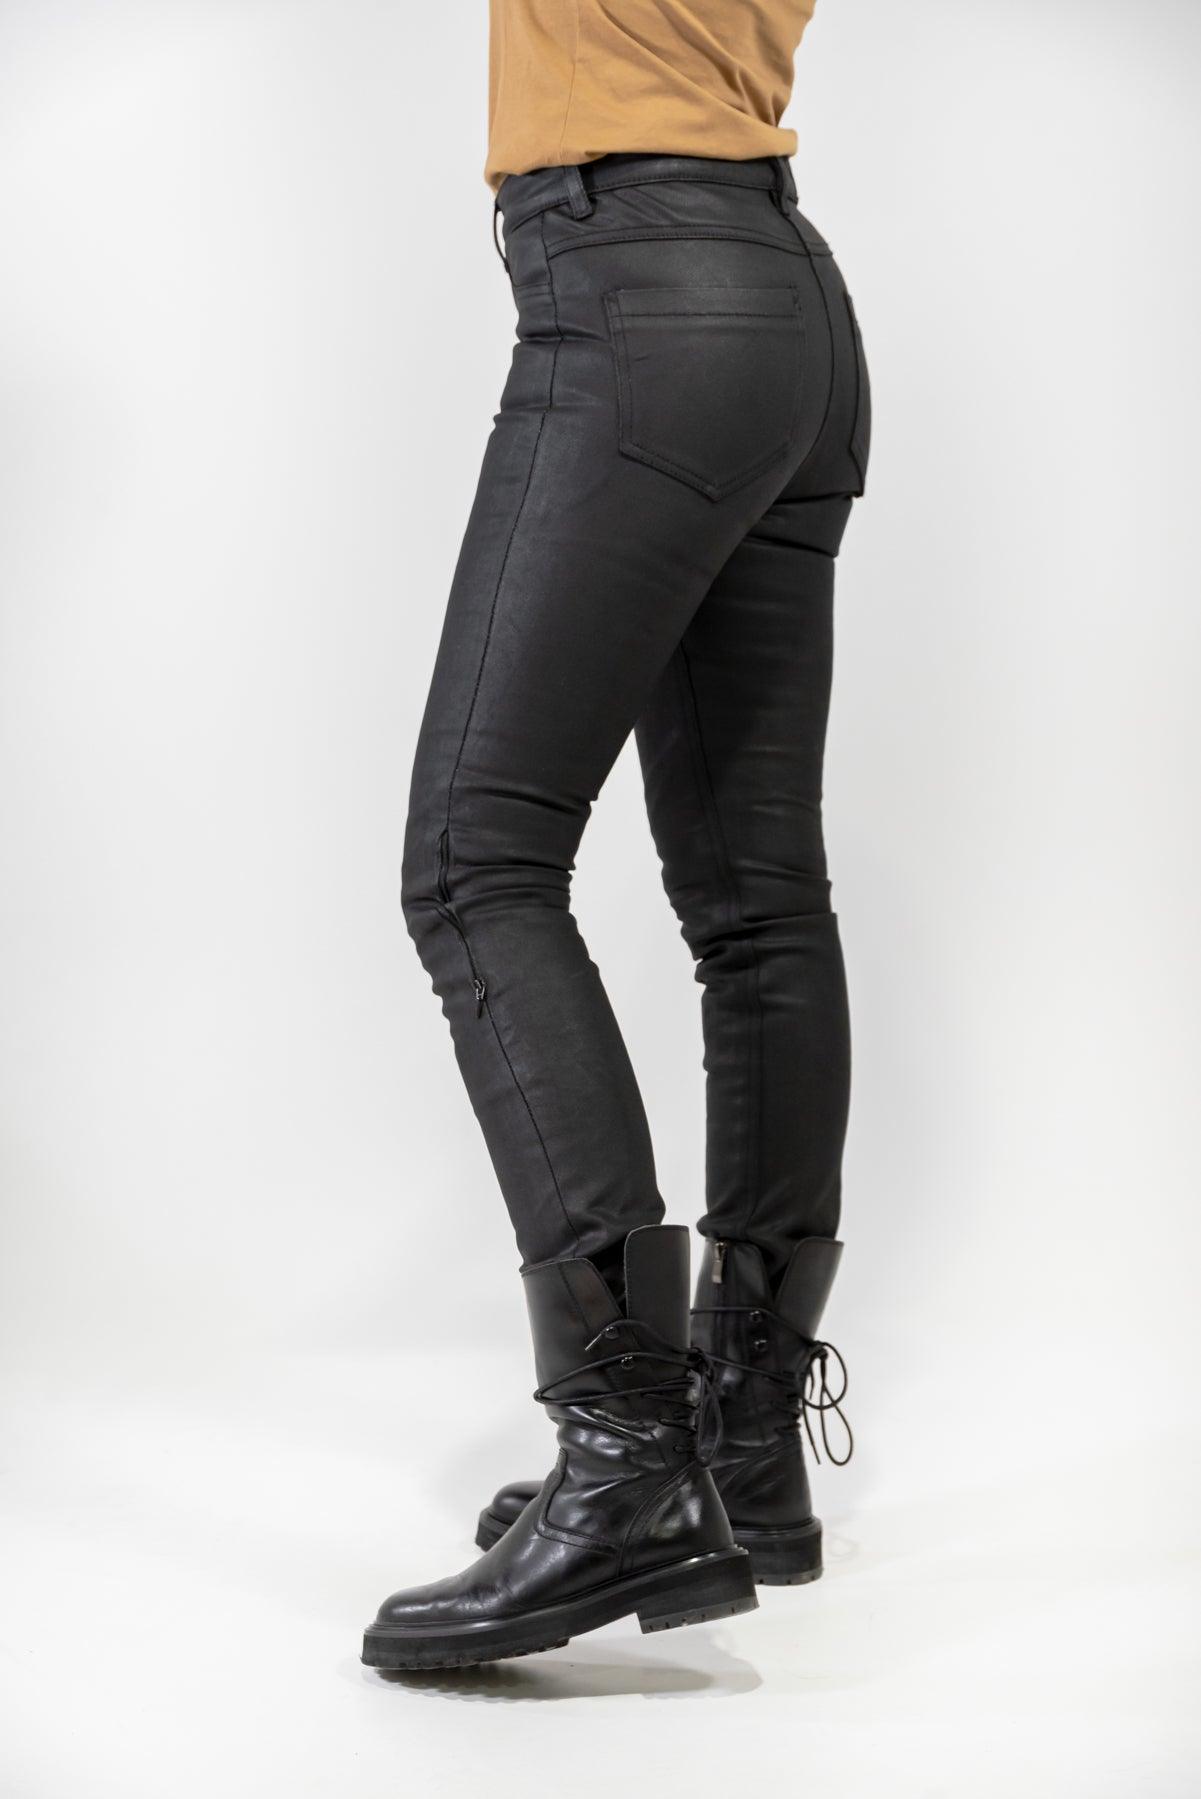 TRITON-G Women's Coated Black Motorcycle Riding Jeans